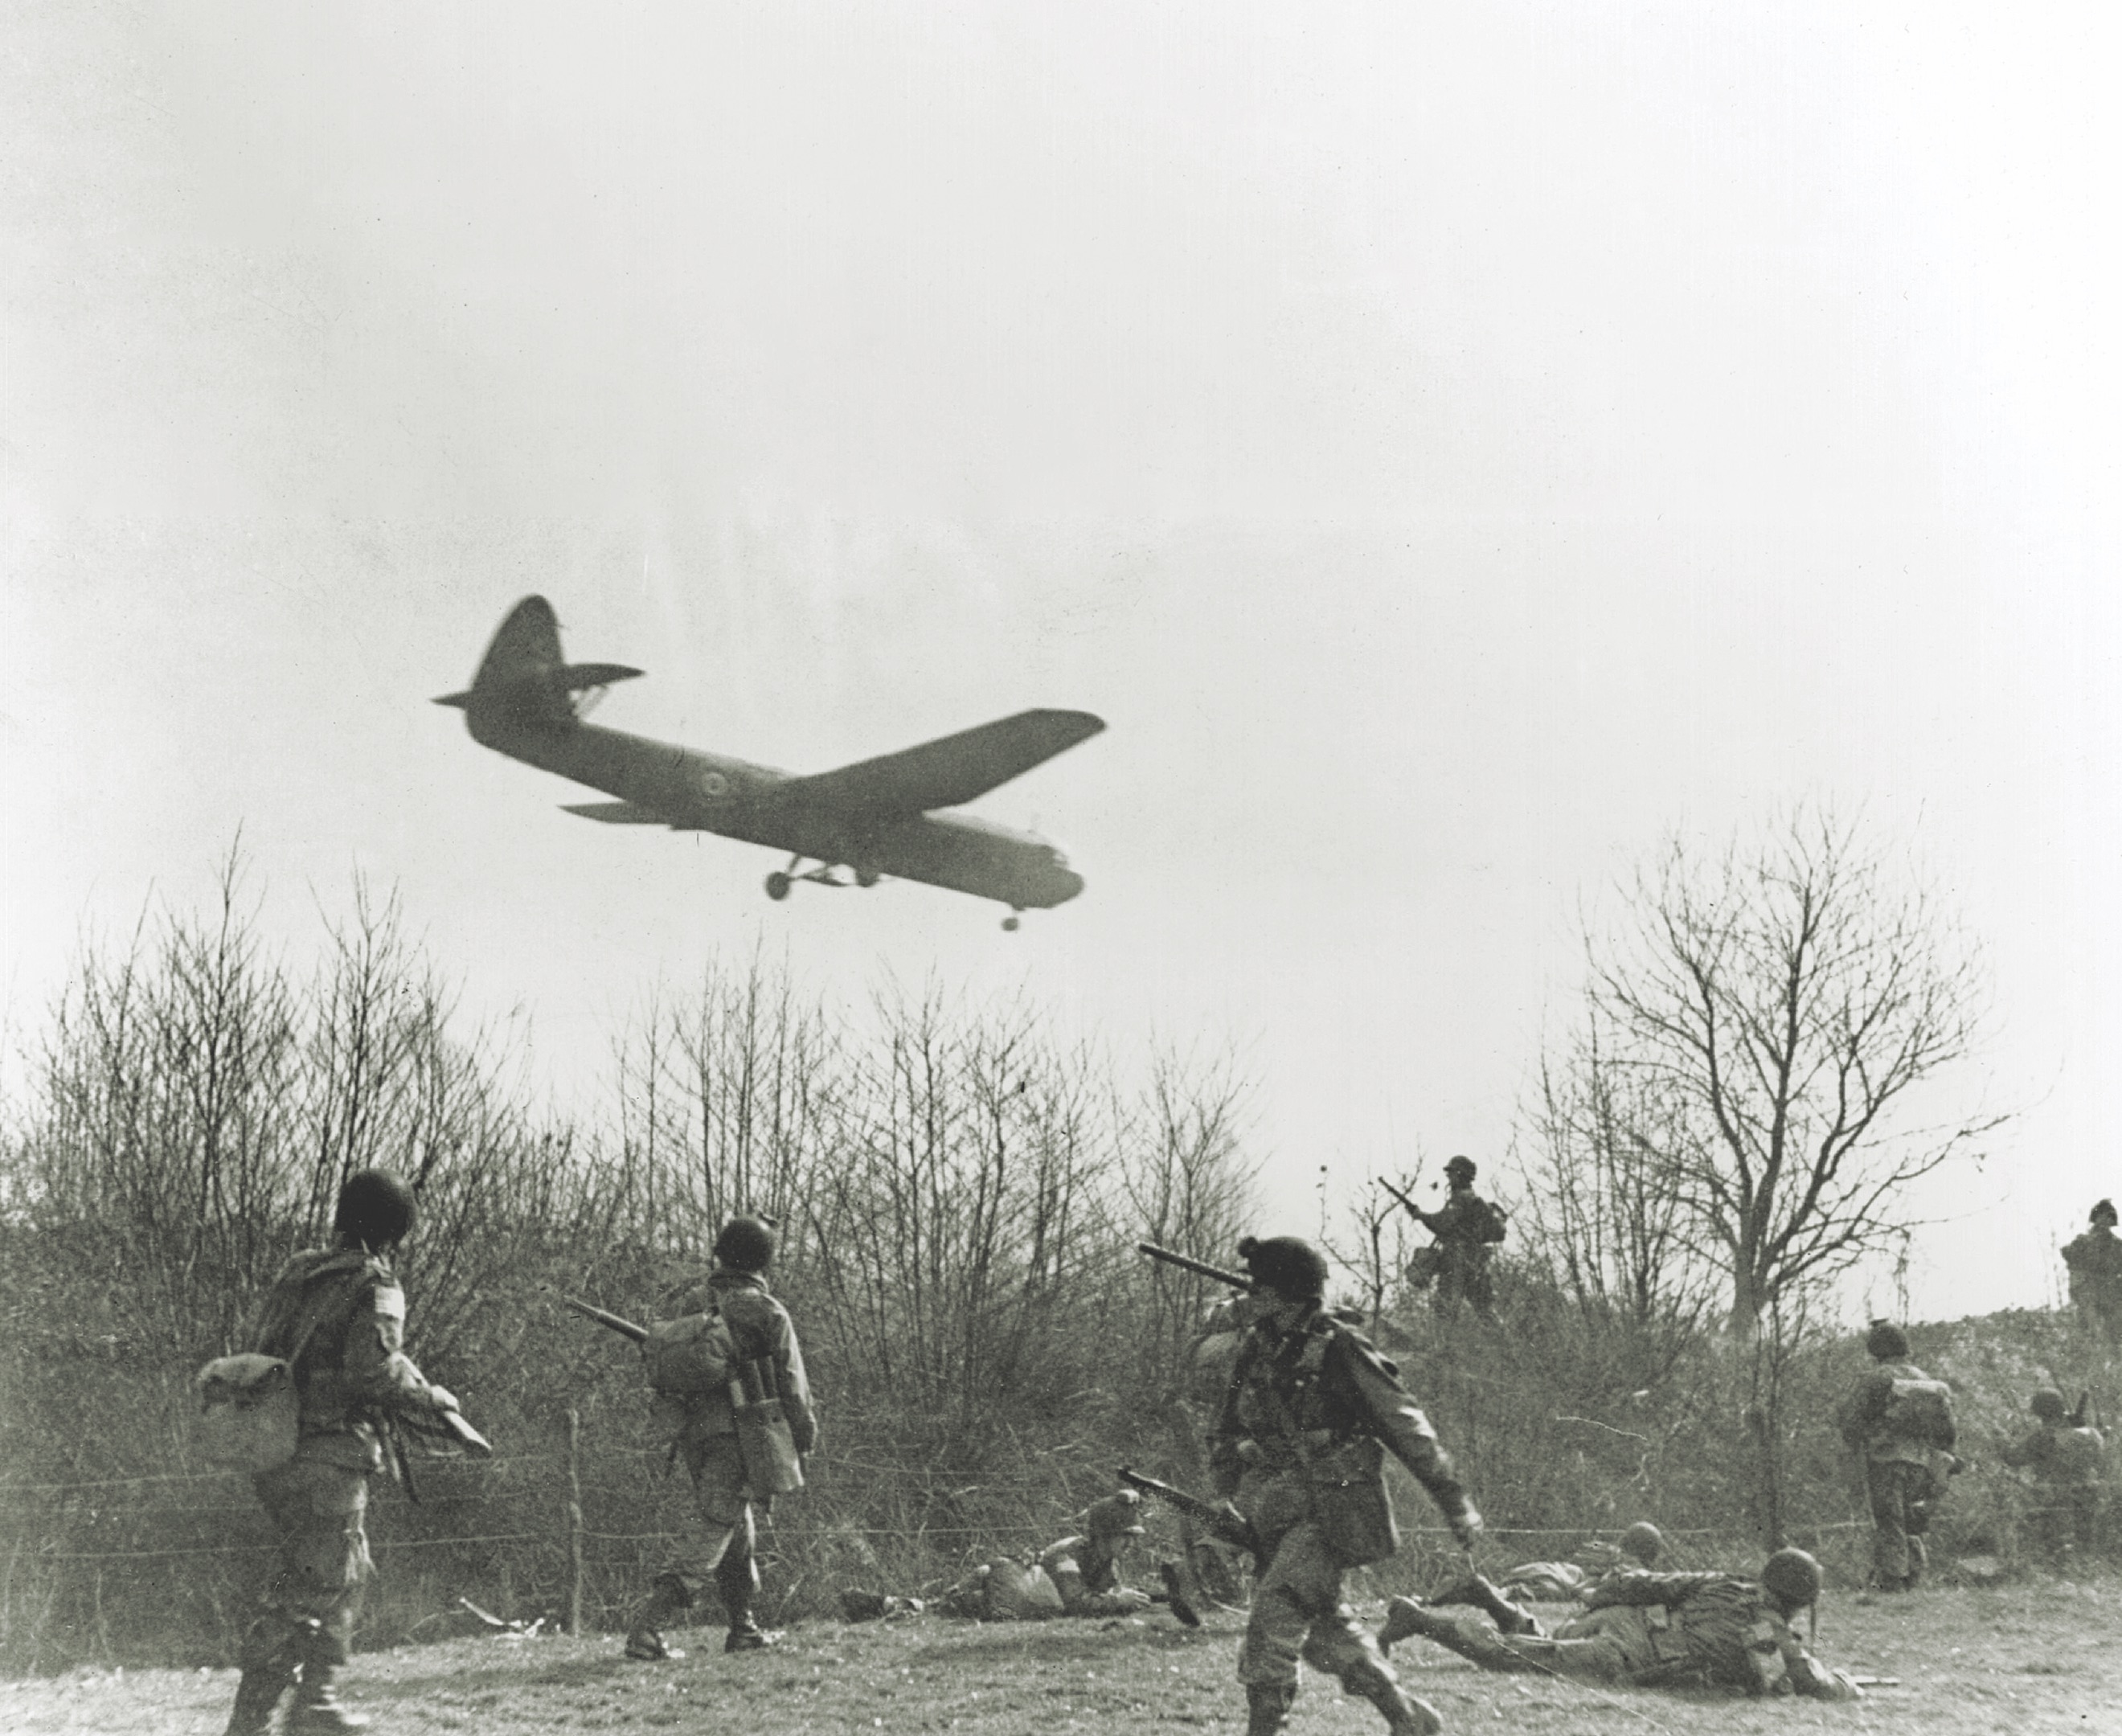 American paratroopers look on as a British Horsa glider lands with reinforcements for the push to secure the Rhine crossing. (Robert Capa/Getty Images)